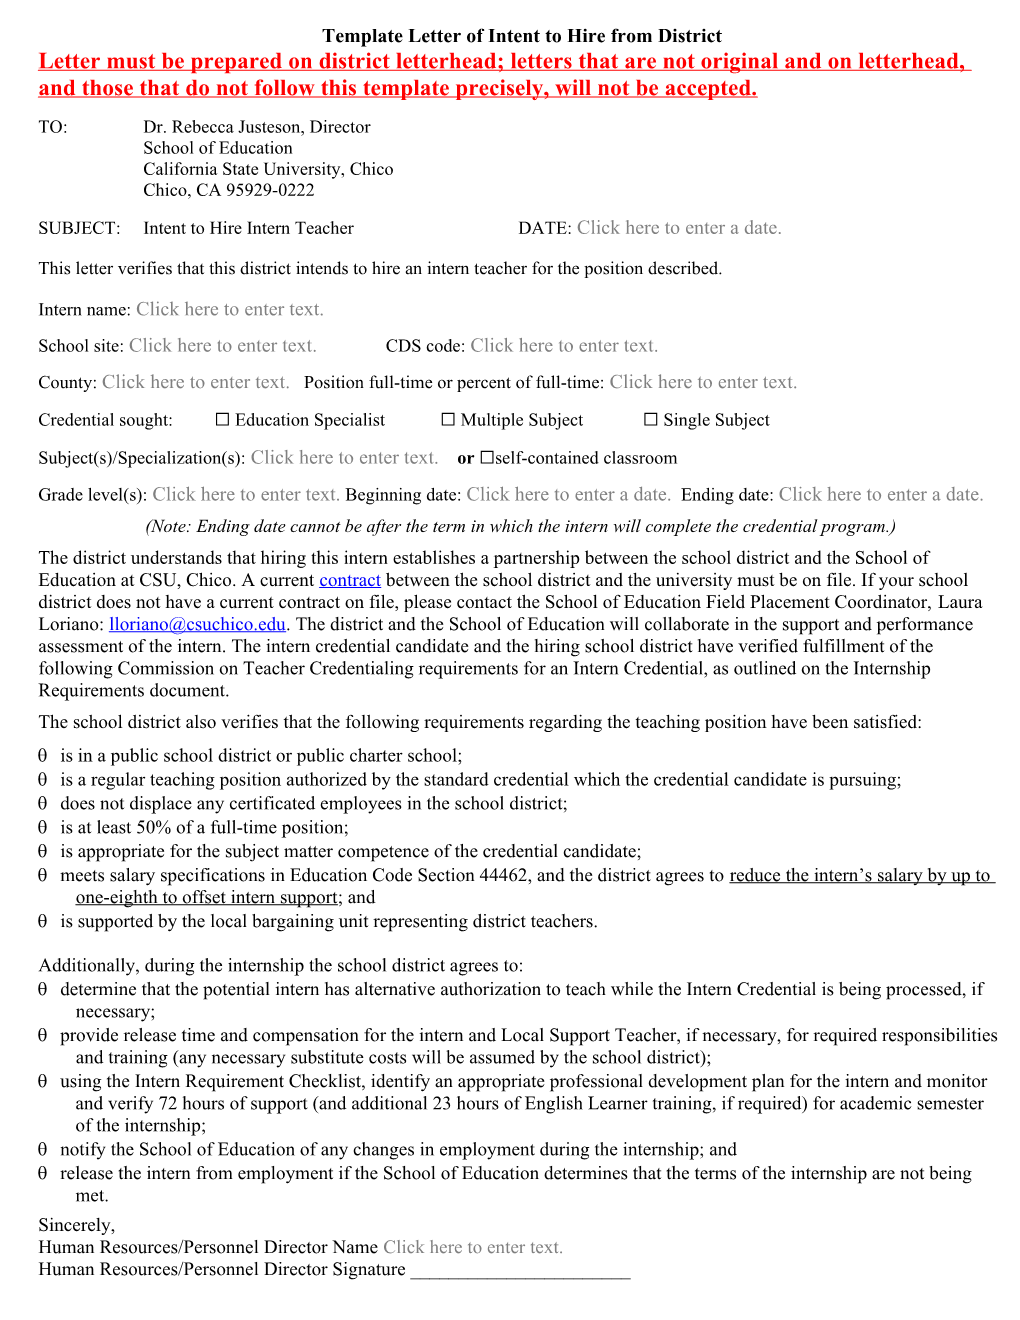 Template Letter of Intent to Hire from District